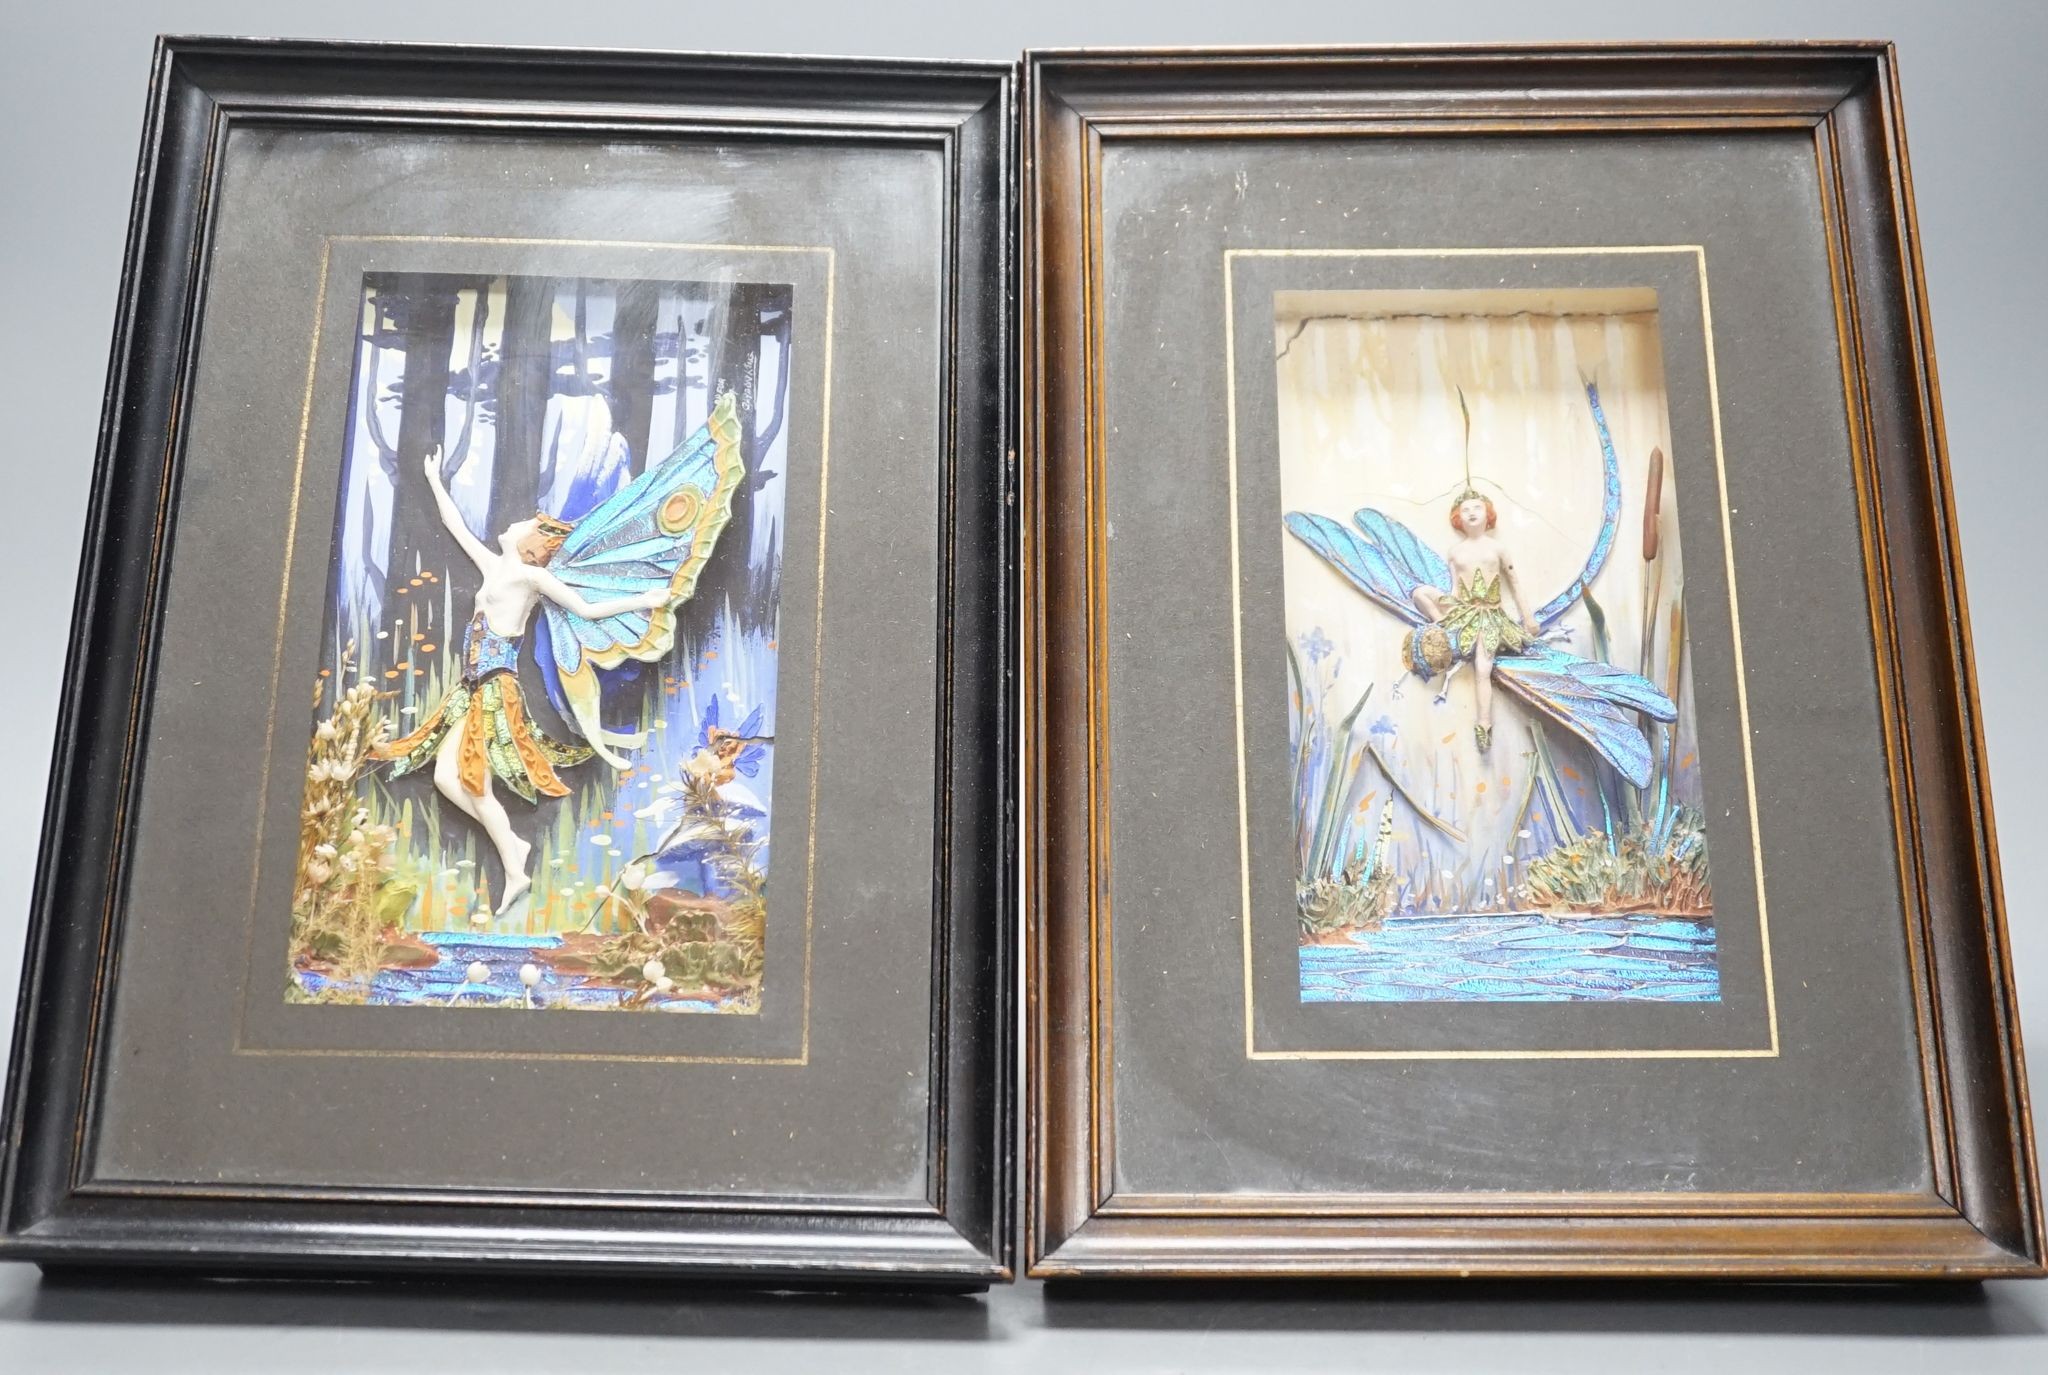 A pair of morpho butterfly wing nymph diorama, signed Gaydon King, Pat. App. For 19907/29, c.1930, 10.5 cms wide x 17.5 cms high. (not including mount or frame).